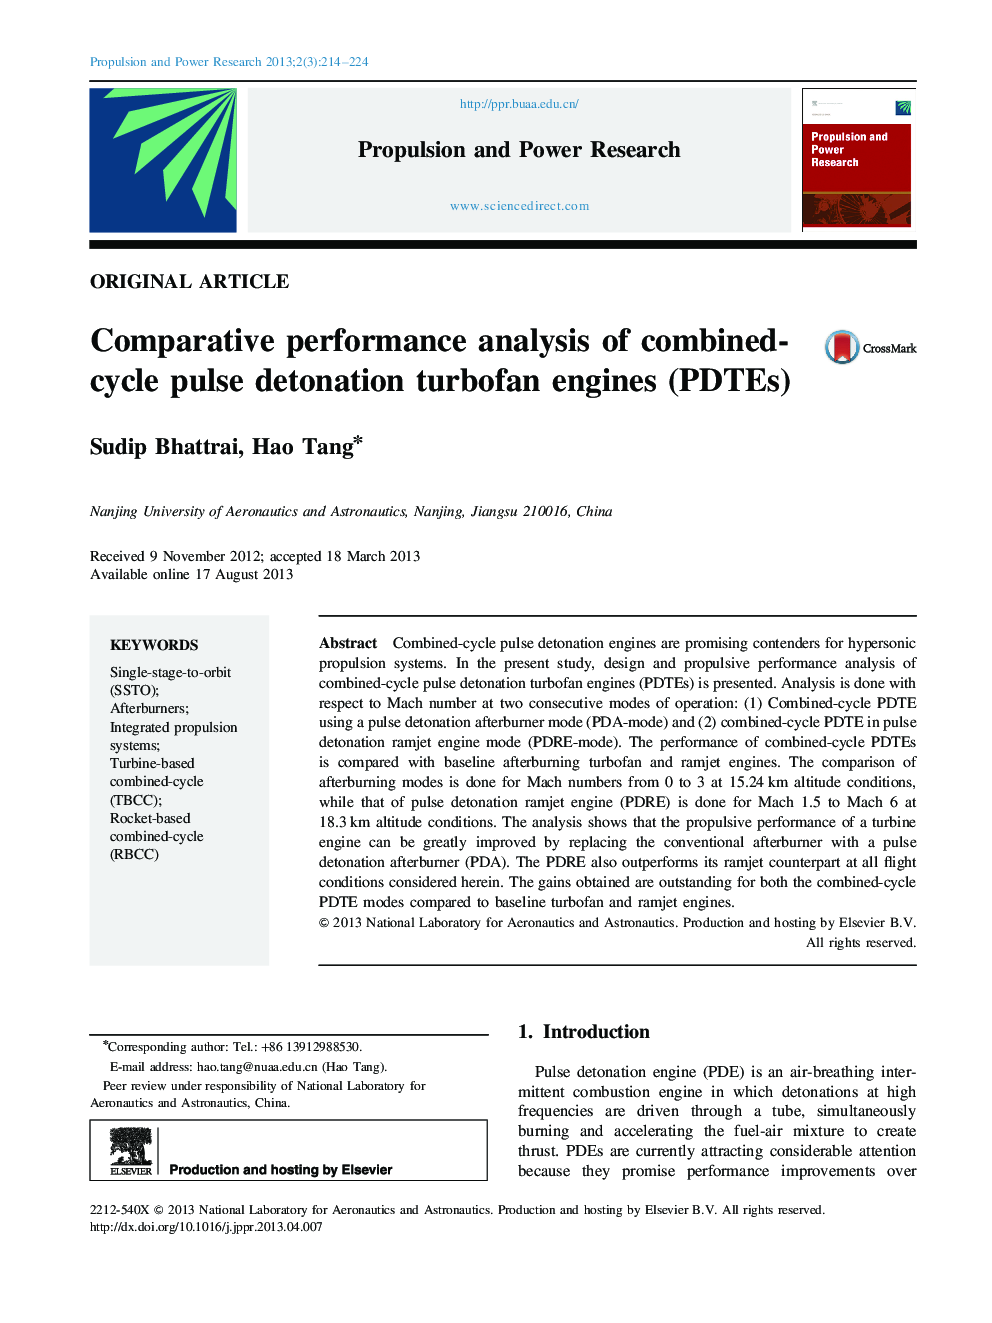 Comparative performance analysis of combined-cycle pulse detonation turbofan engines (PDTEs) 